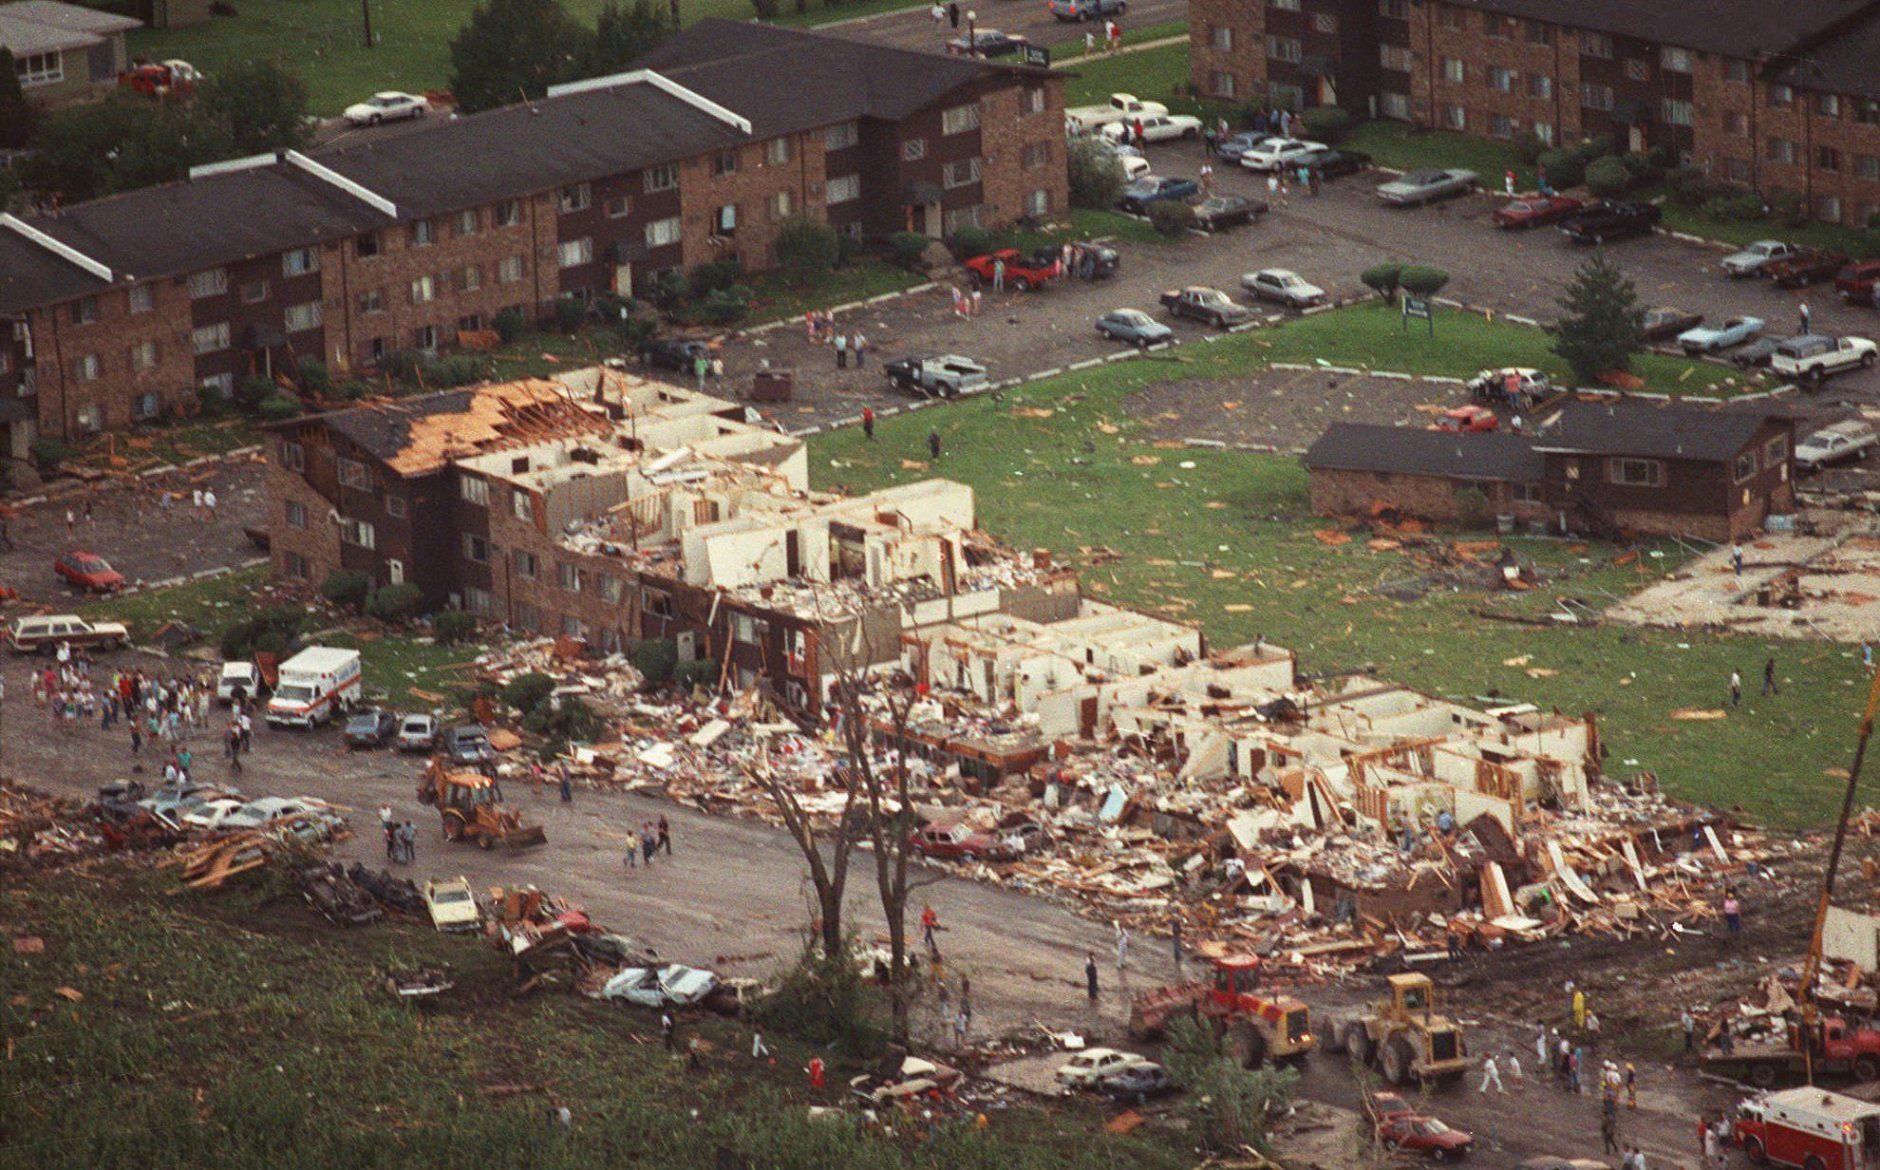 An apartment building in Crest Hill, Ill., is shown Aug. 28, 1990, after being destroyed by a tornado.  The American Midwest is home to more tornadoes than any place on Earth, earning the moniker "Tornado Alley." Illinois is one of the most "tornadically active" states in the country according to Greg Simunich of Omni Weather Inc,. in West Chicago, Ill., with Kansas, Oklahoma and Texas taking top honors. (AP Photo/Mark Elias, File)